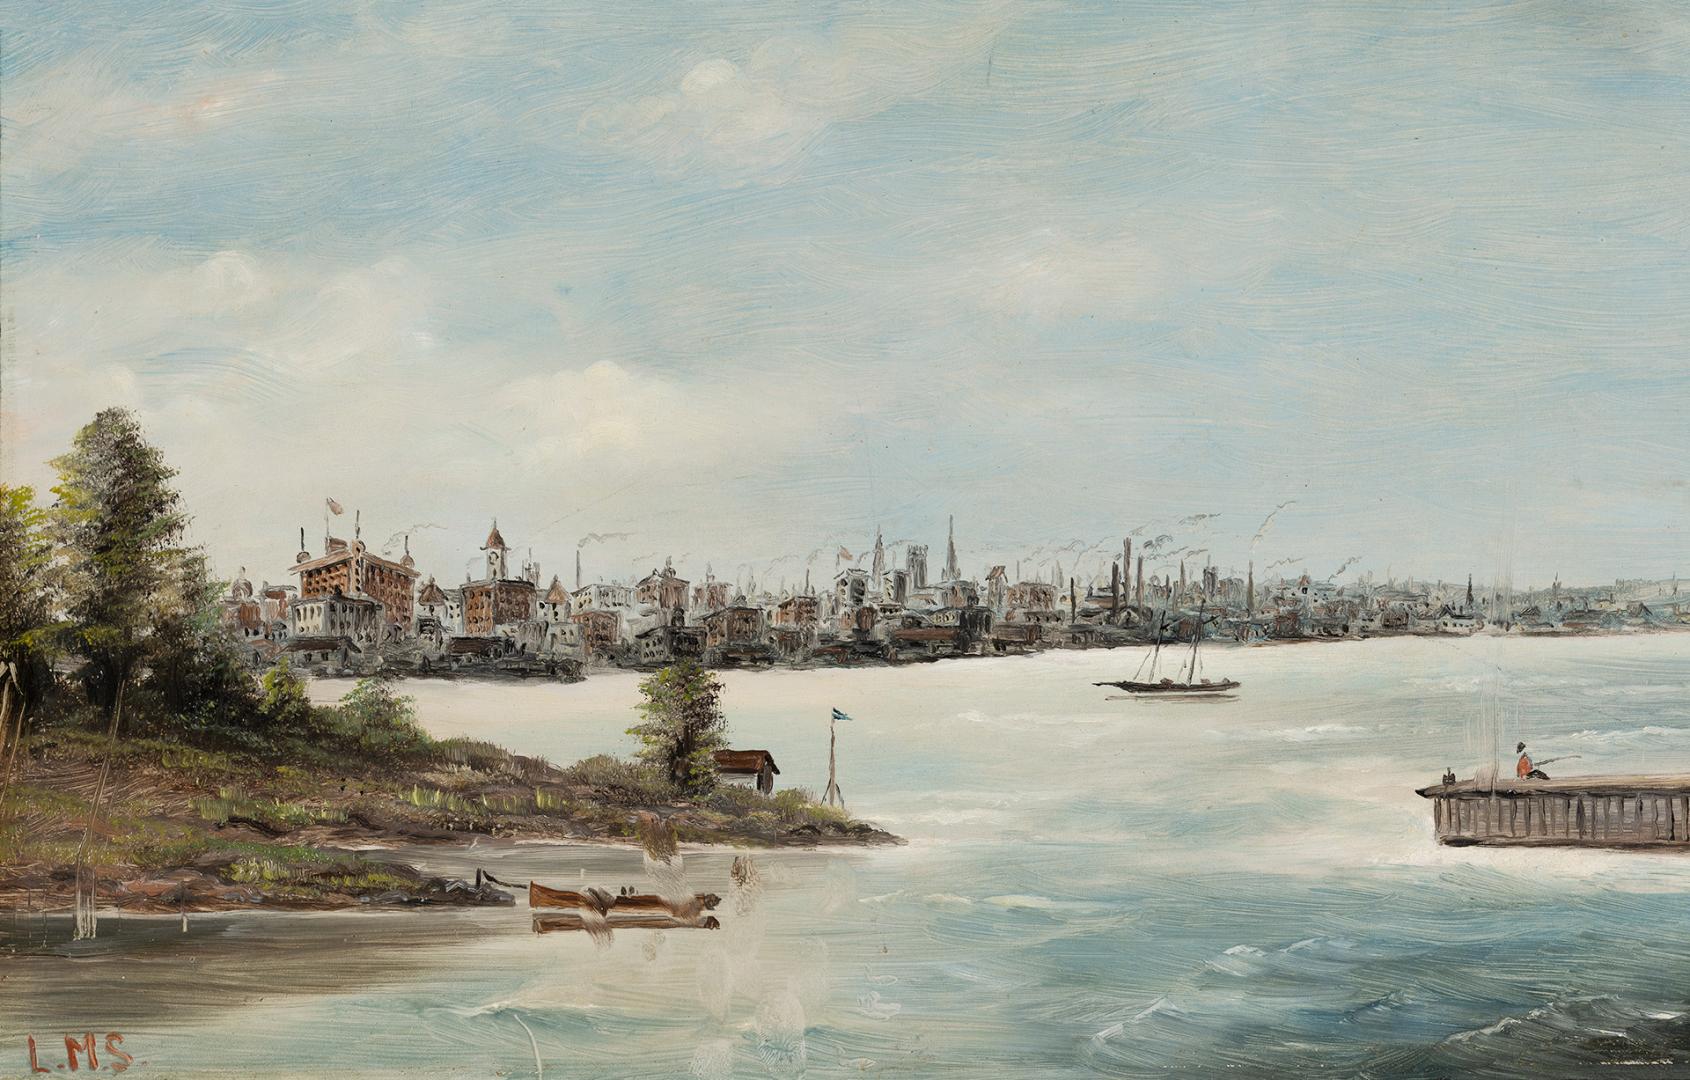 A painting of a harbour, with a city skyline in the background across a body of water. There is ...